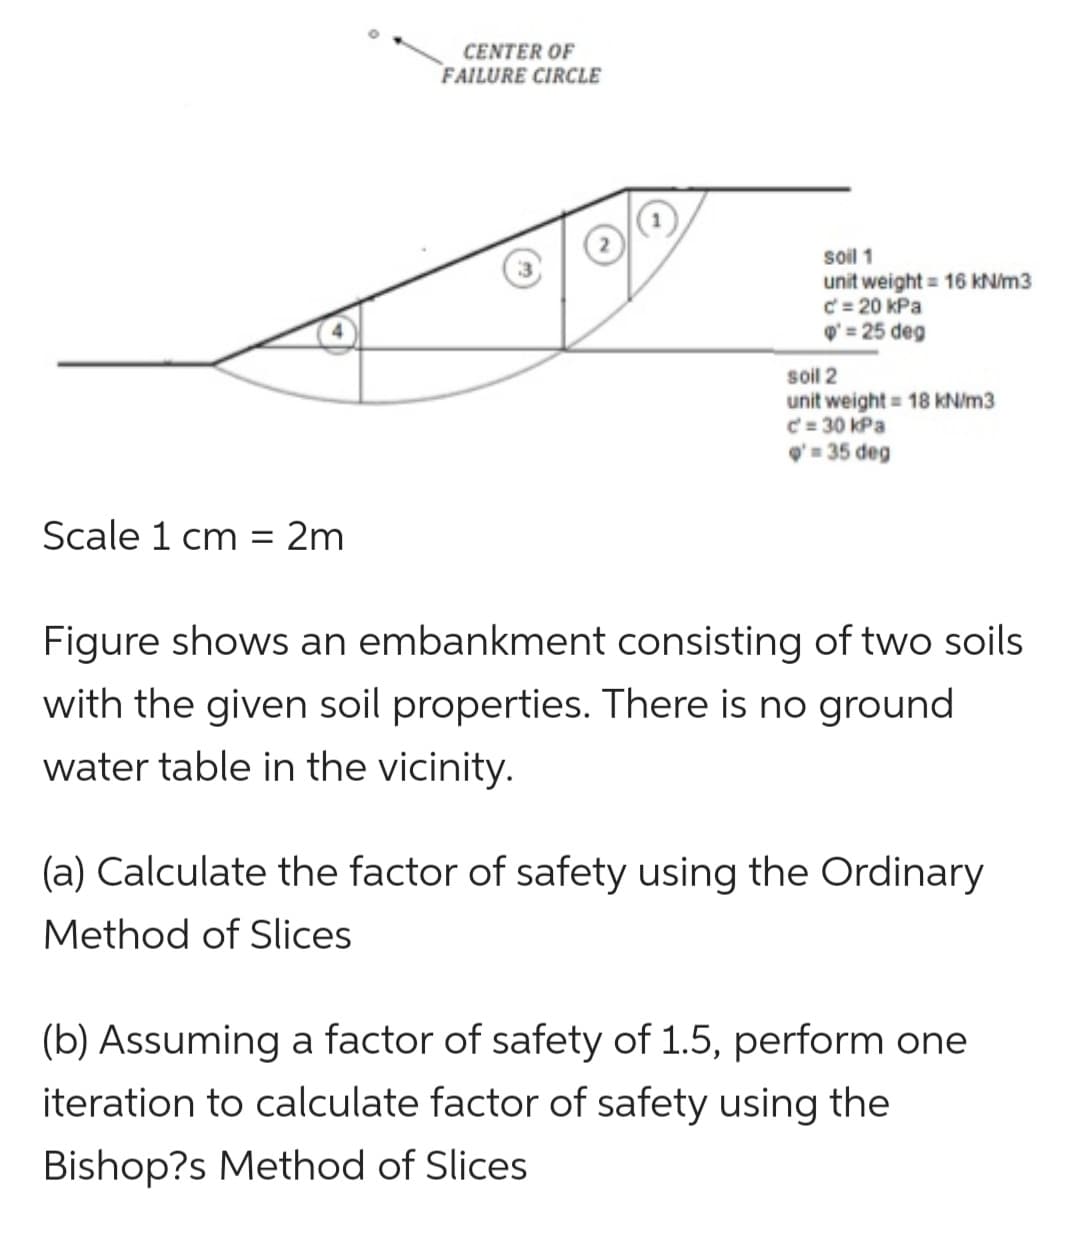 CENTER OF
FAILURE CIRCLE
soil 1
unit weight = 16 kN/m3
c = 20 kPa
' = 25 deg
soil 2
unit weight = 18 kN/m3
c = 30 kPa
= 35 deg
Scale 1 cm = 2m
Figure shows an embankment consisting of two soils
with the given soil properties. There is no ground
water table in the vicinity.
(a) Calculate the factor of safety using the Ordinary
Method of Slices
(b) Assuming a factor of safety of 1.5, perform one
iteration to calculate factor of safety using the
Bishop?s Method of Slices